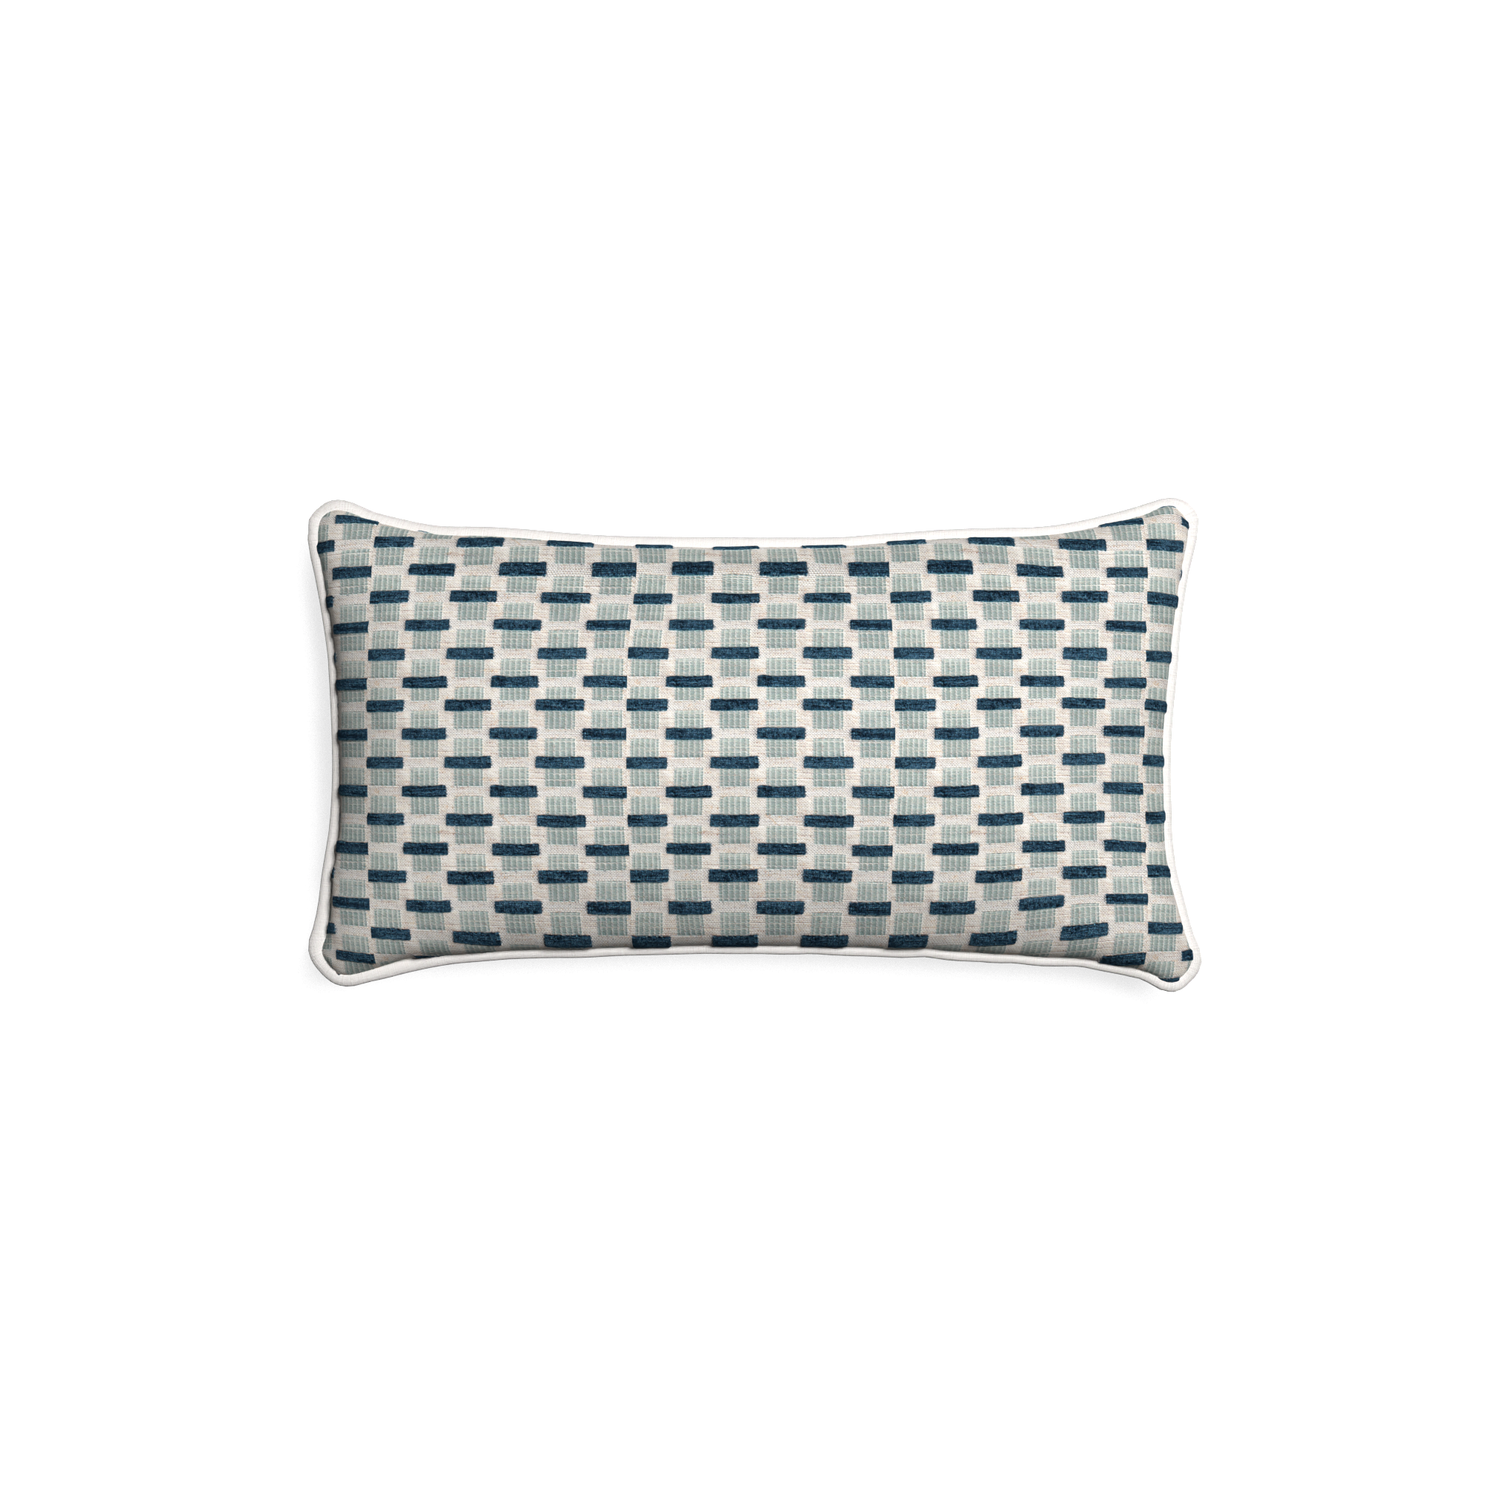 Petite-lumbar willow amalfi custom blue geometric chenillepillow with snow piping on white background